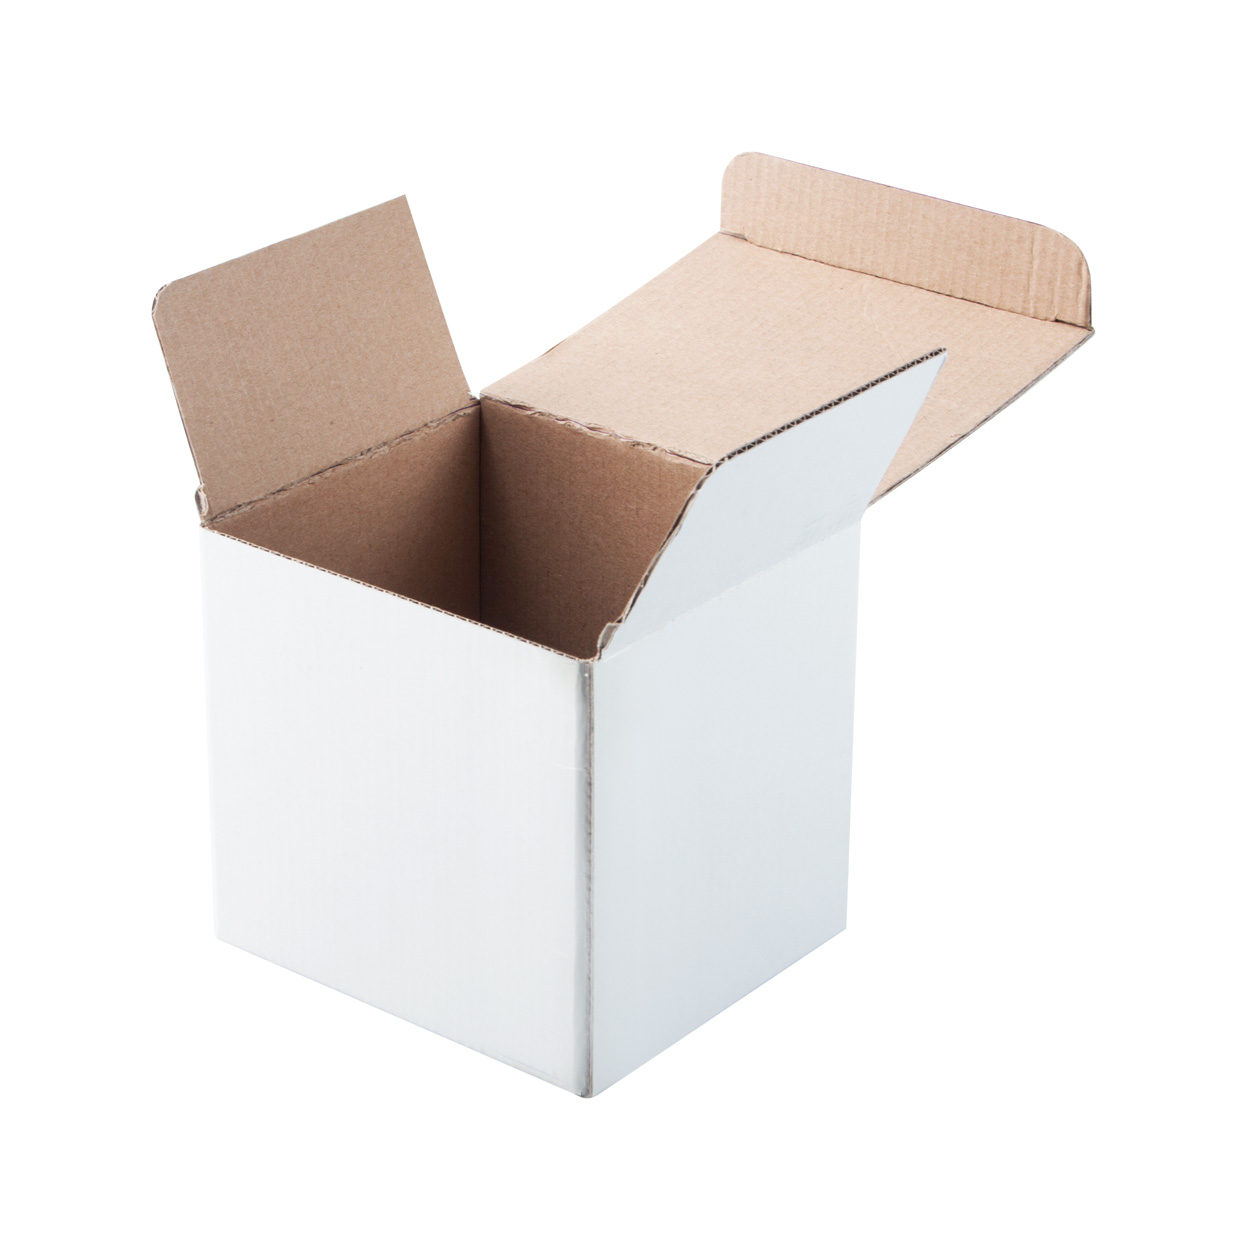 Paper cup box THREE - white / natural